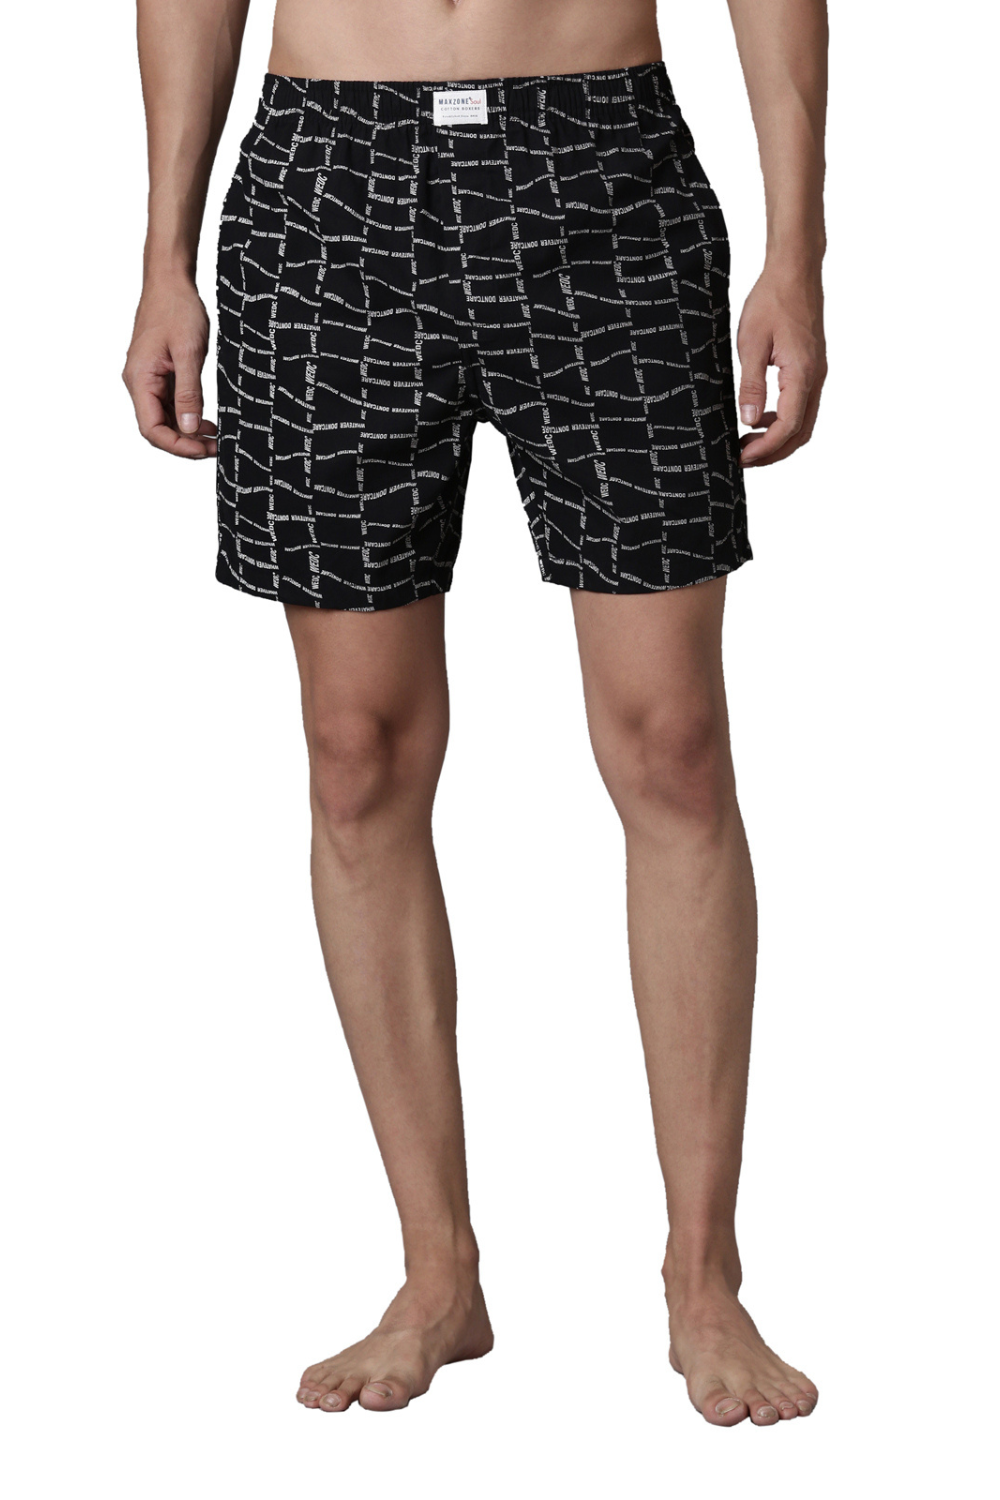 White Printed & Black Printed 365 Boxers Combo  Maxzone Clothing   